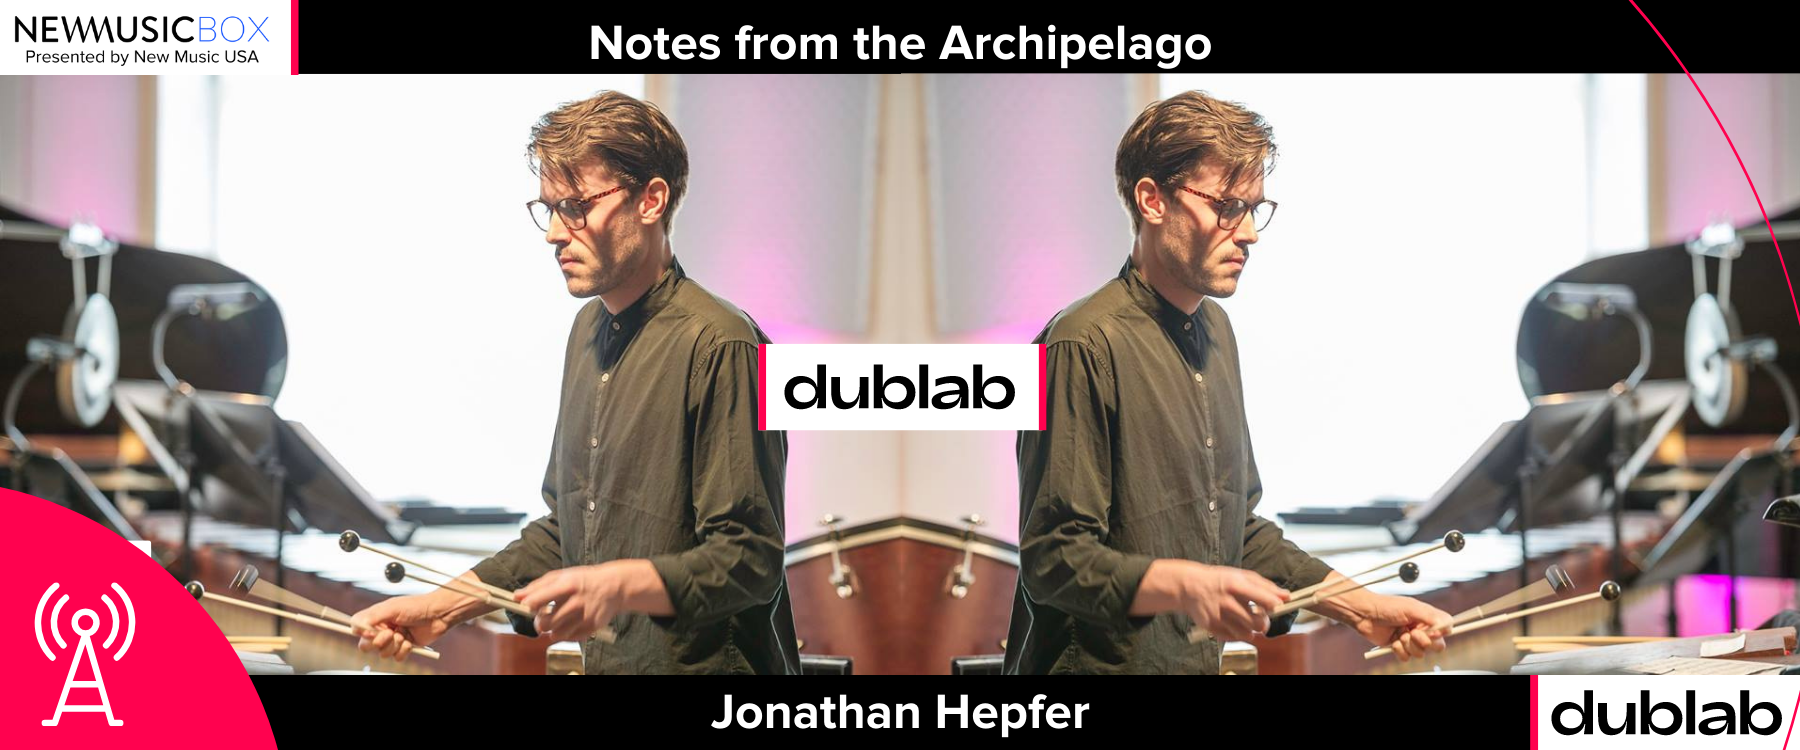 NMBx dublab co-branded web header showing Jonathan Hepfer playing mallet percussion